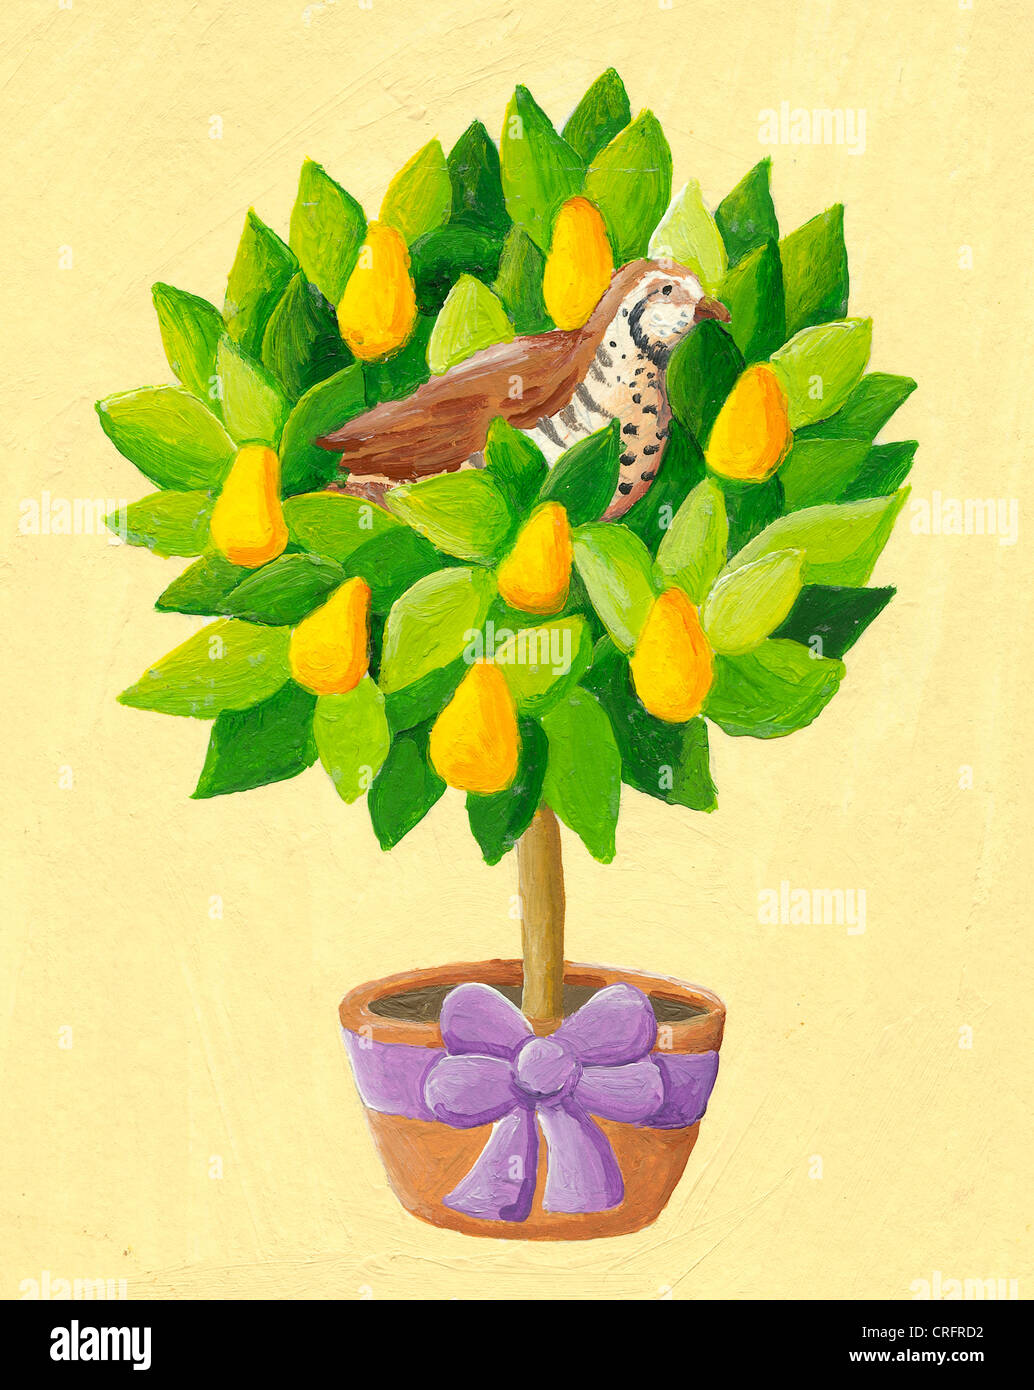 Acrylic illustration of a partridge in a pear tree Stock Photo